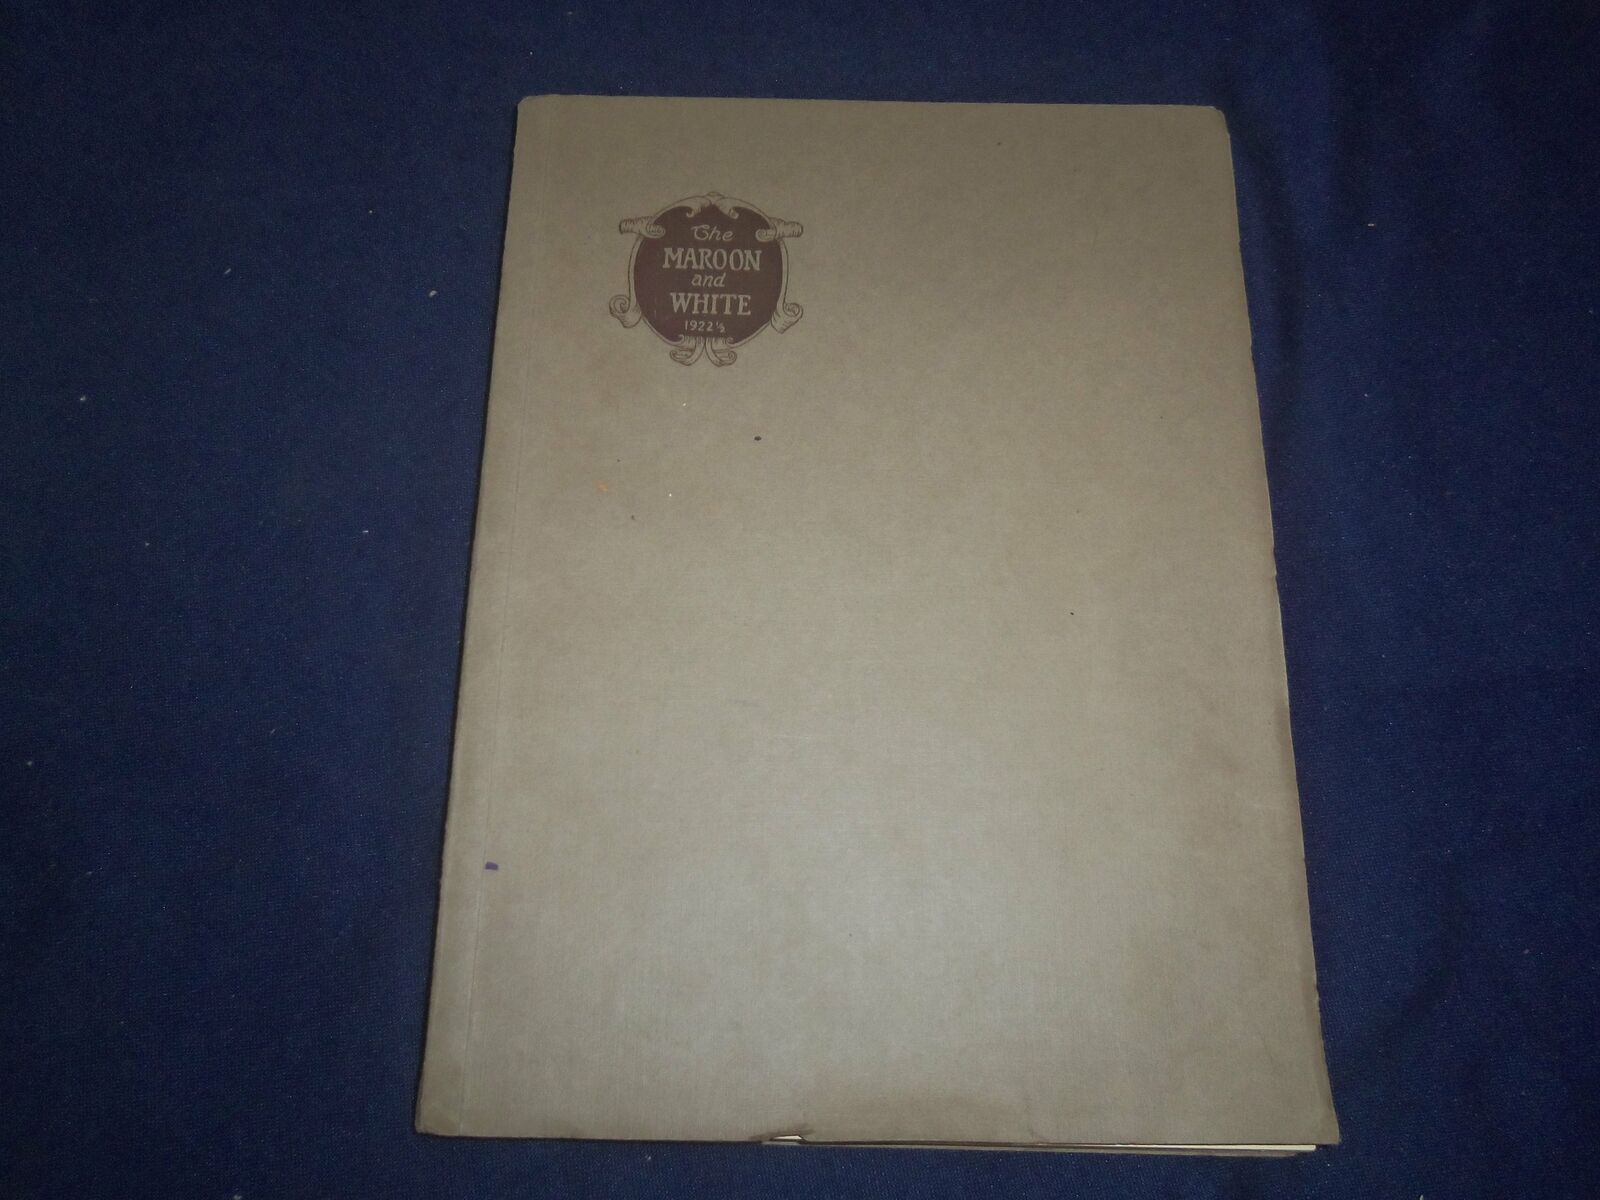 1922 1/2 THE MAROON AND WHITE AUSTIN HIGH SCHOOL YEARBOOK - CHICAGO, IL -YB 2375